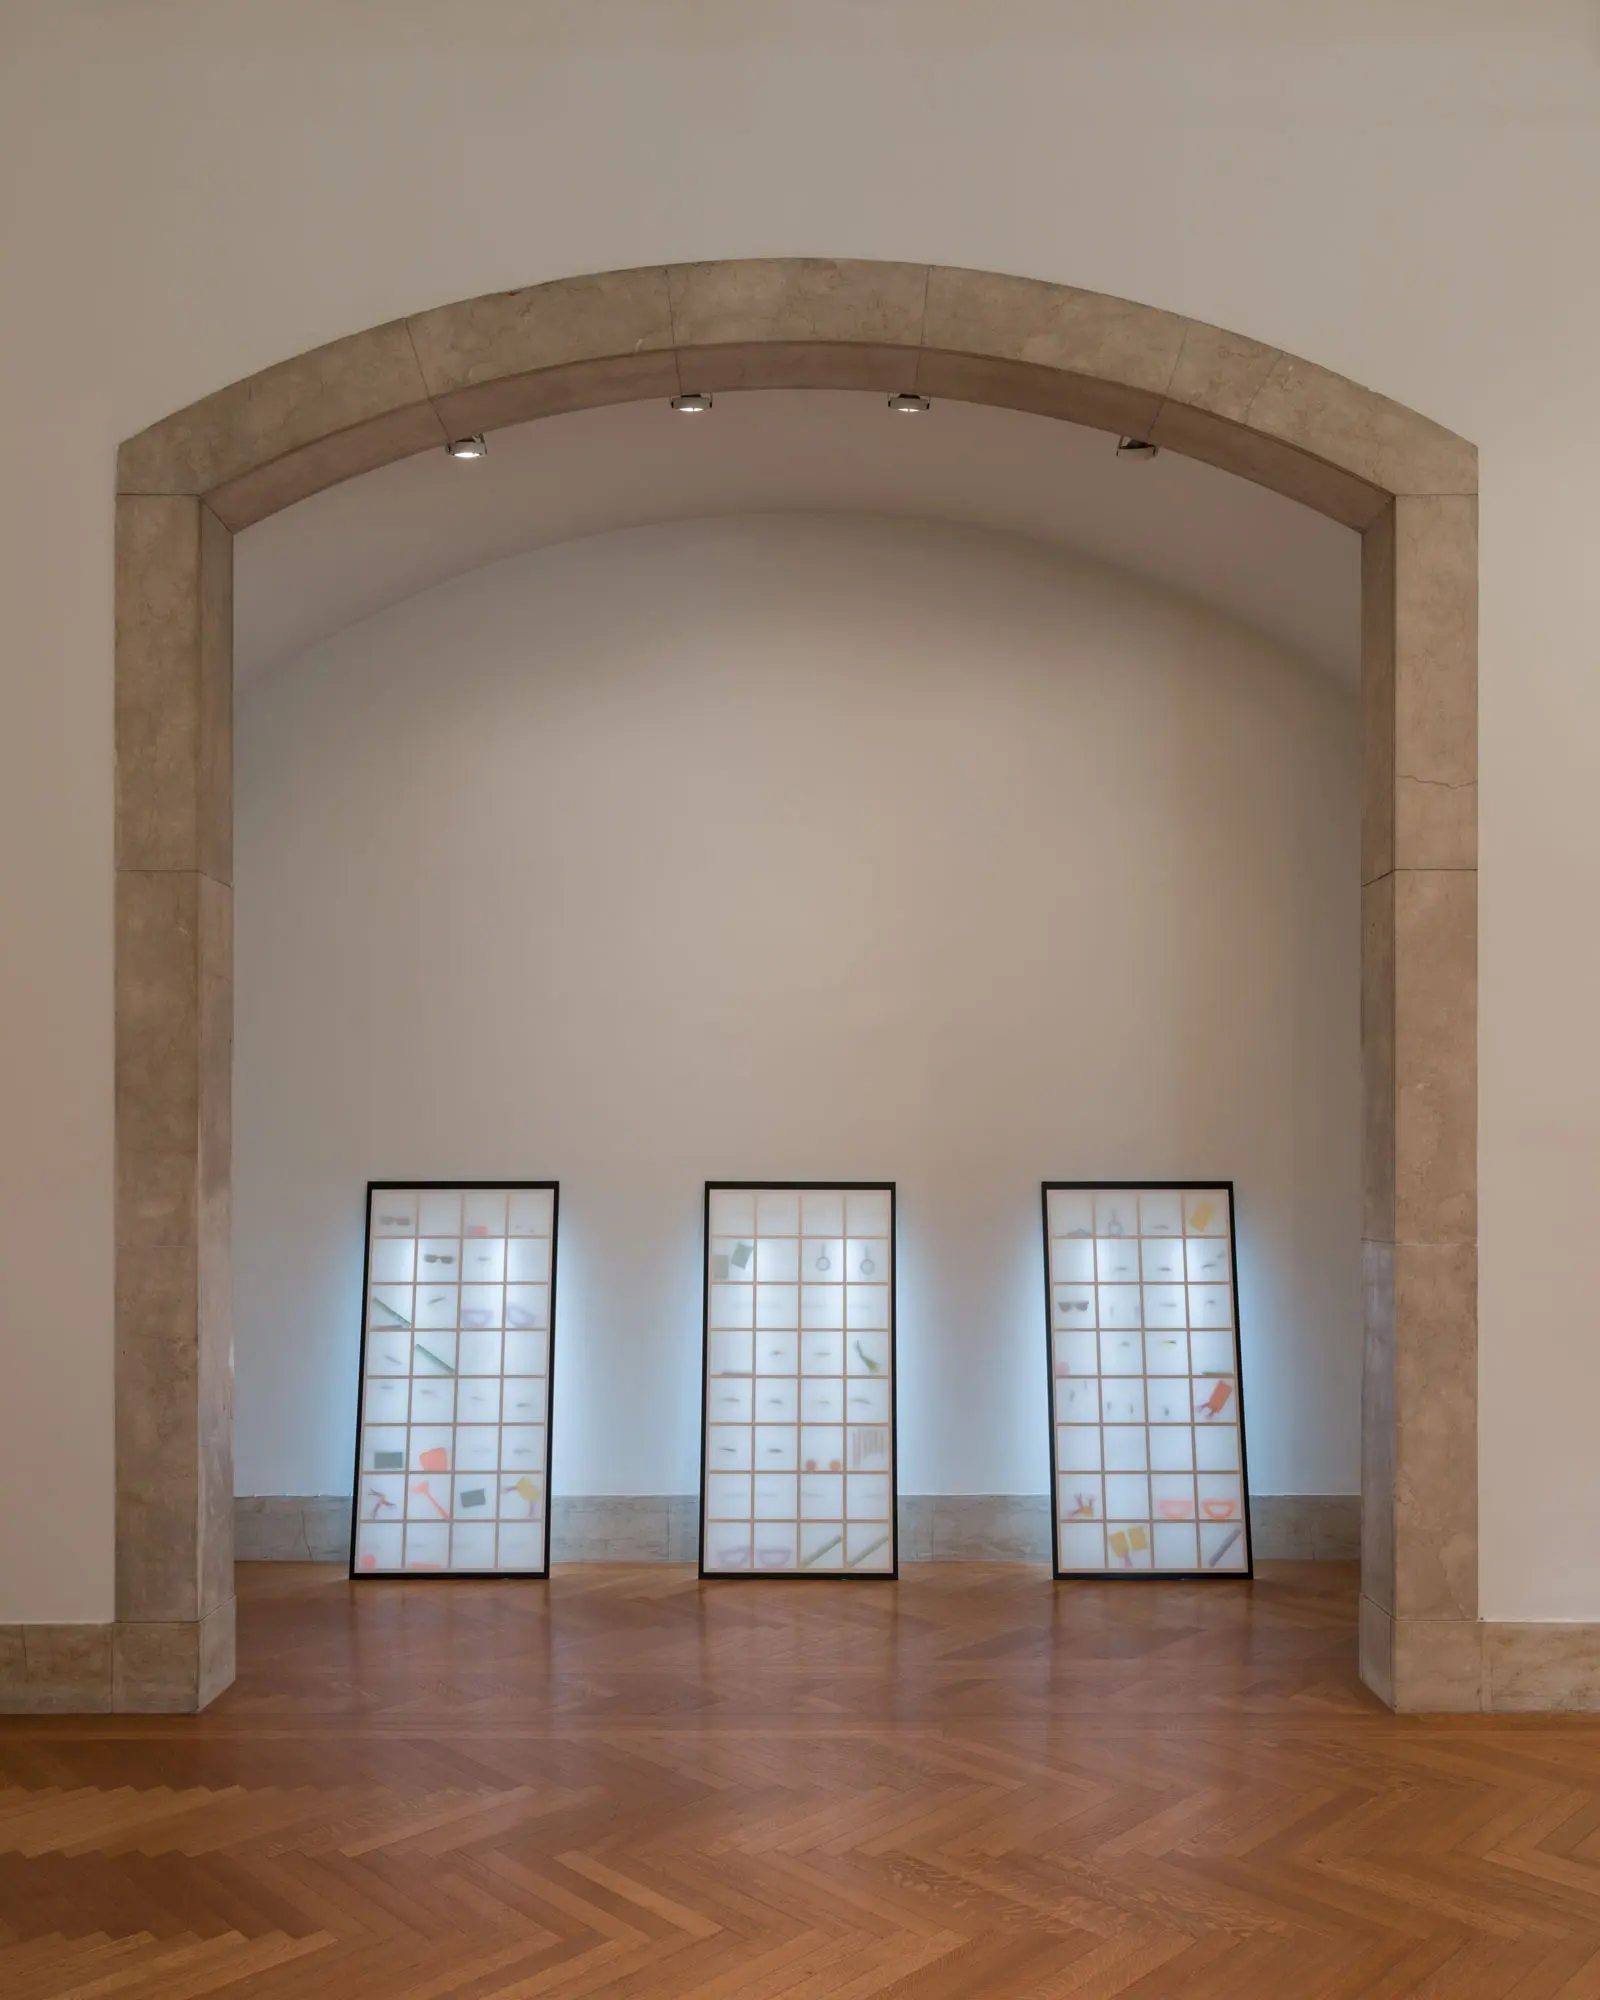 Three paper screens lean against a gallery wall inside an arched stone entryway. They are lit from behind and colorful objects in wooden grids are visible inside through the paper.